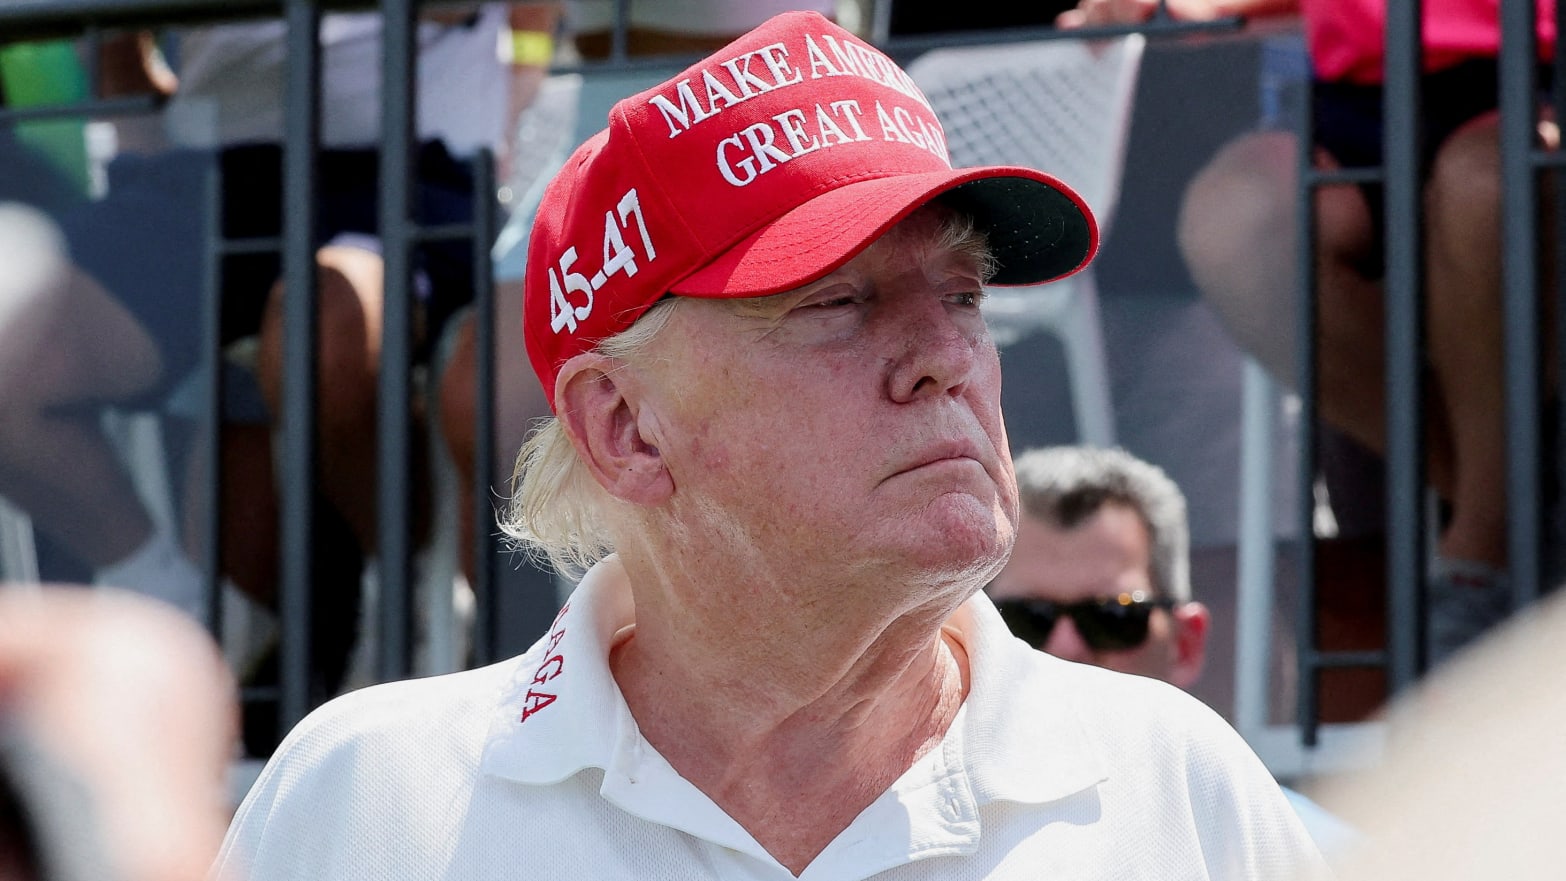 Donald Trump at a golf course wearing a red MAGA hat and a white polo shirt.